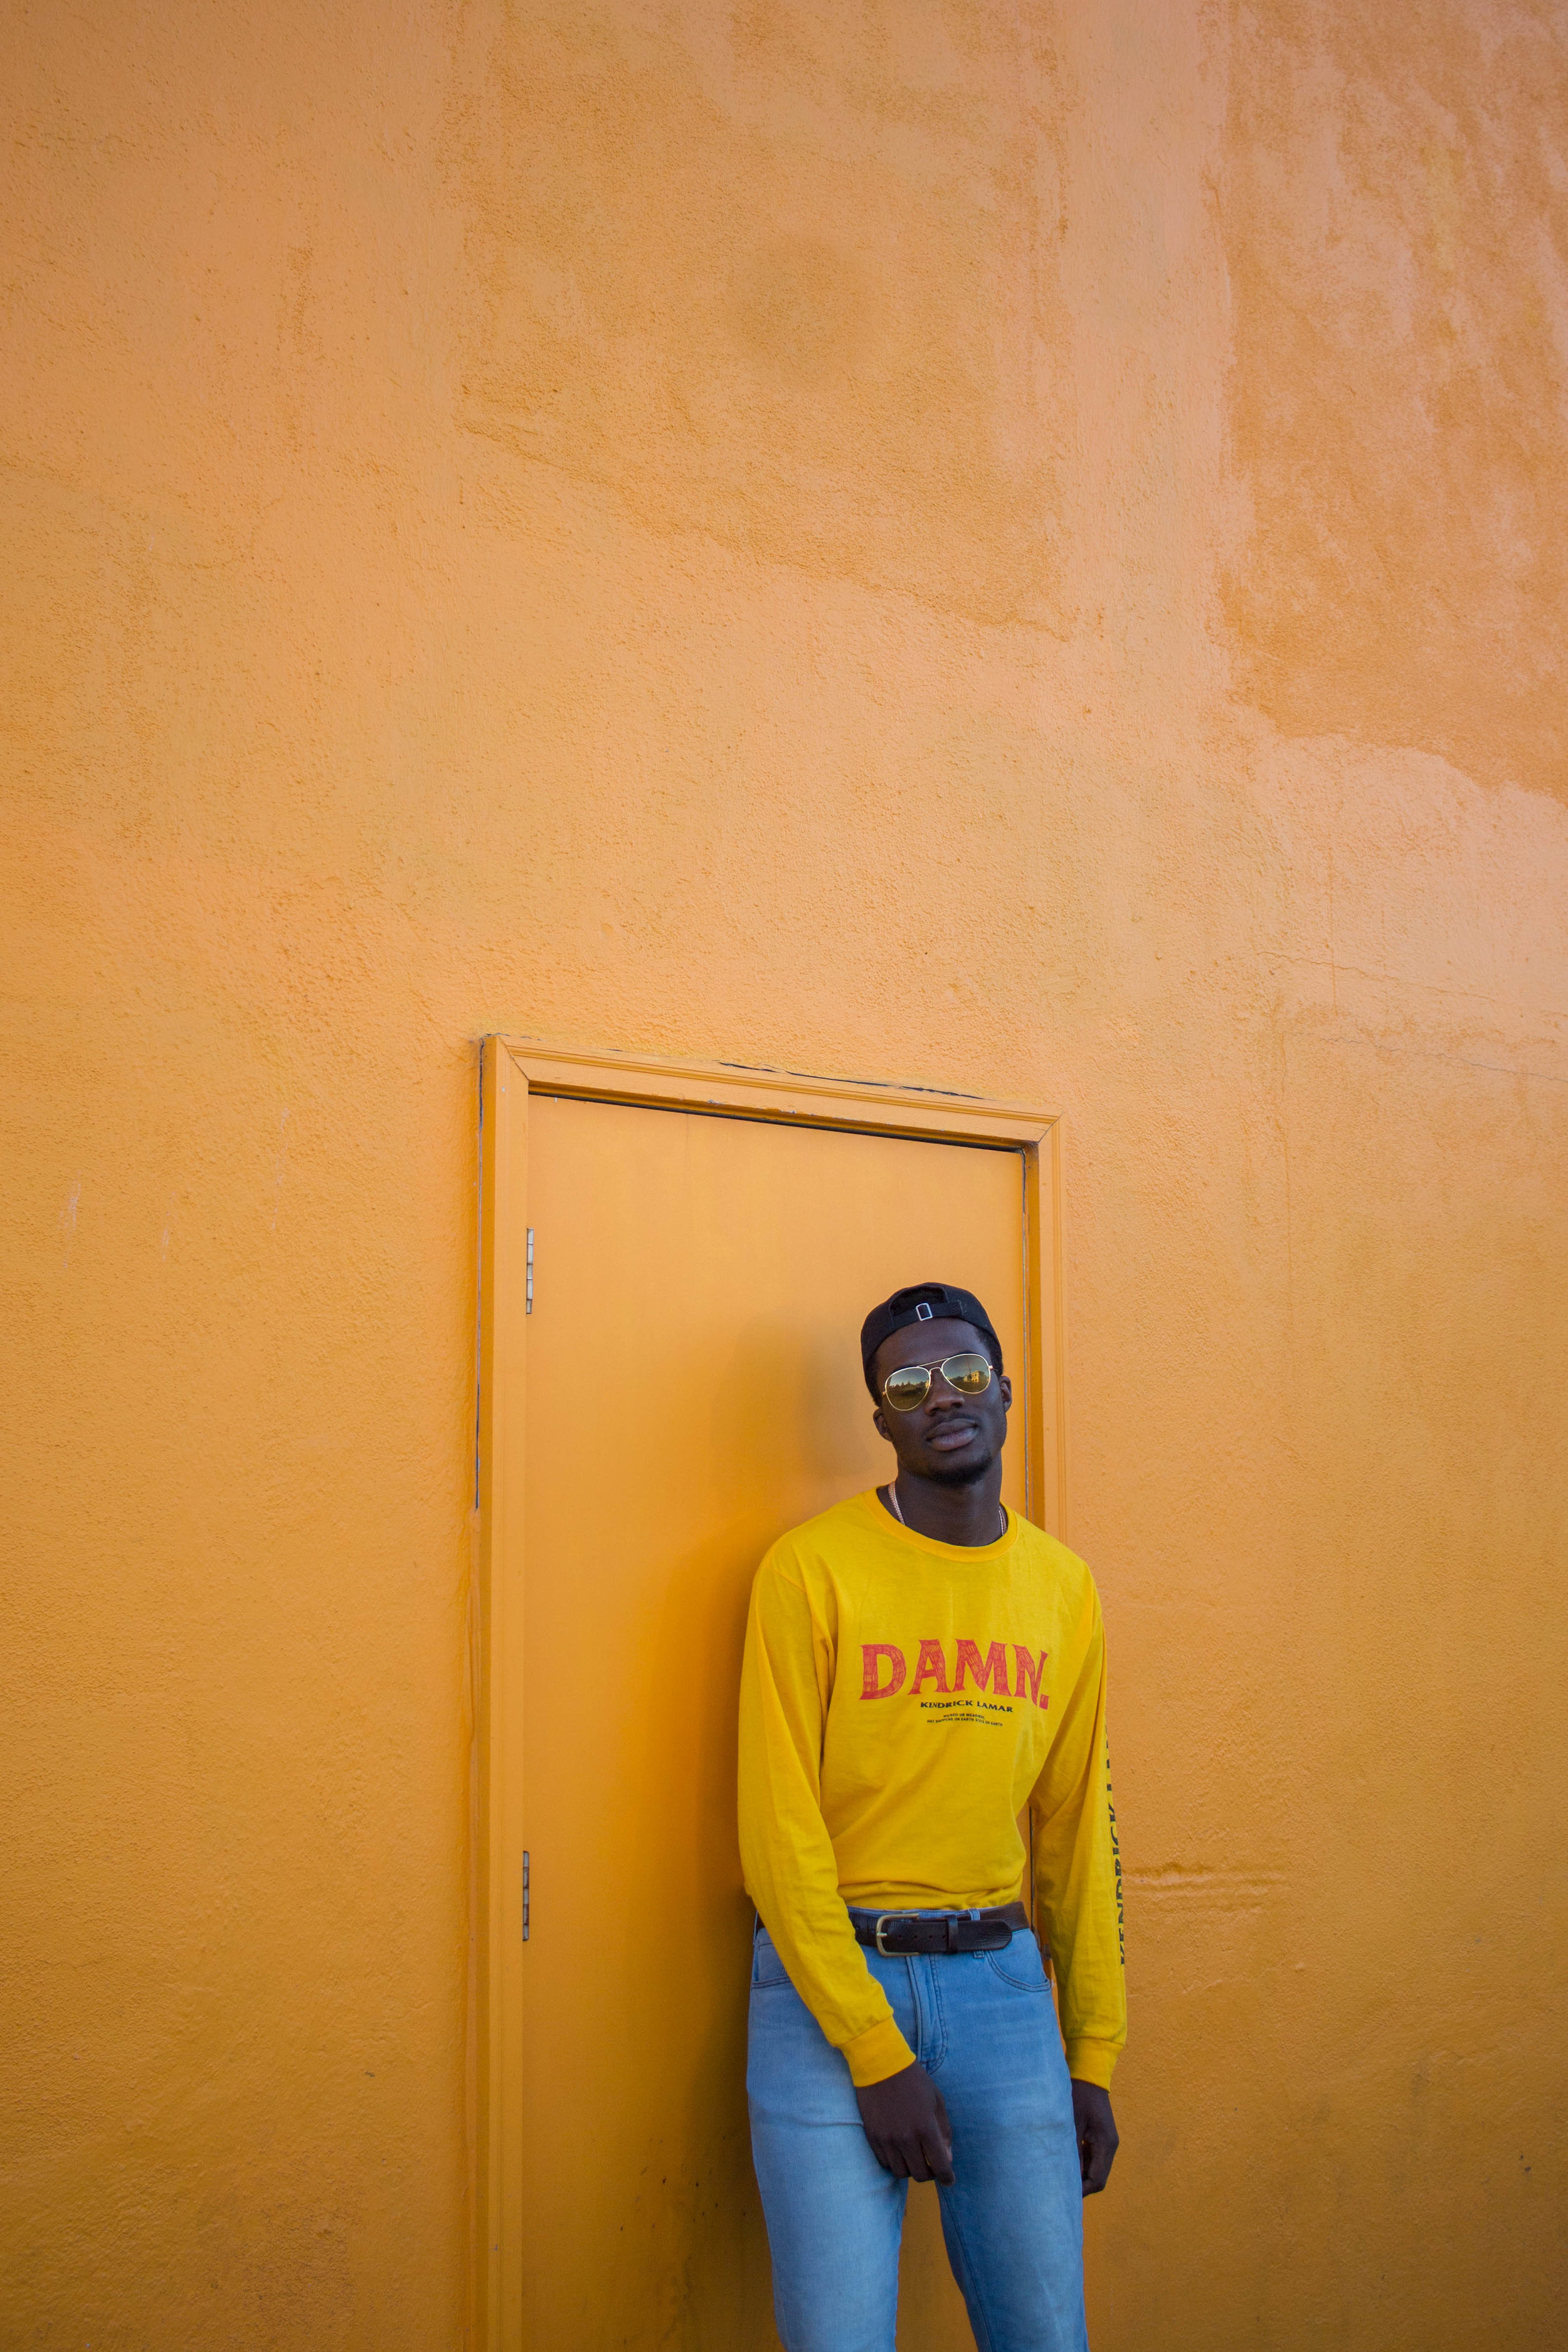  Man standing in front of yellow wall with a door wearing yellow shirt and light blue jeans. 